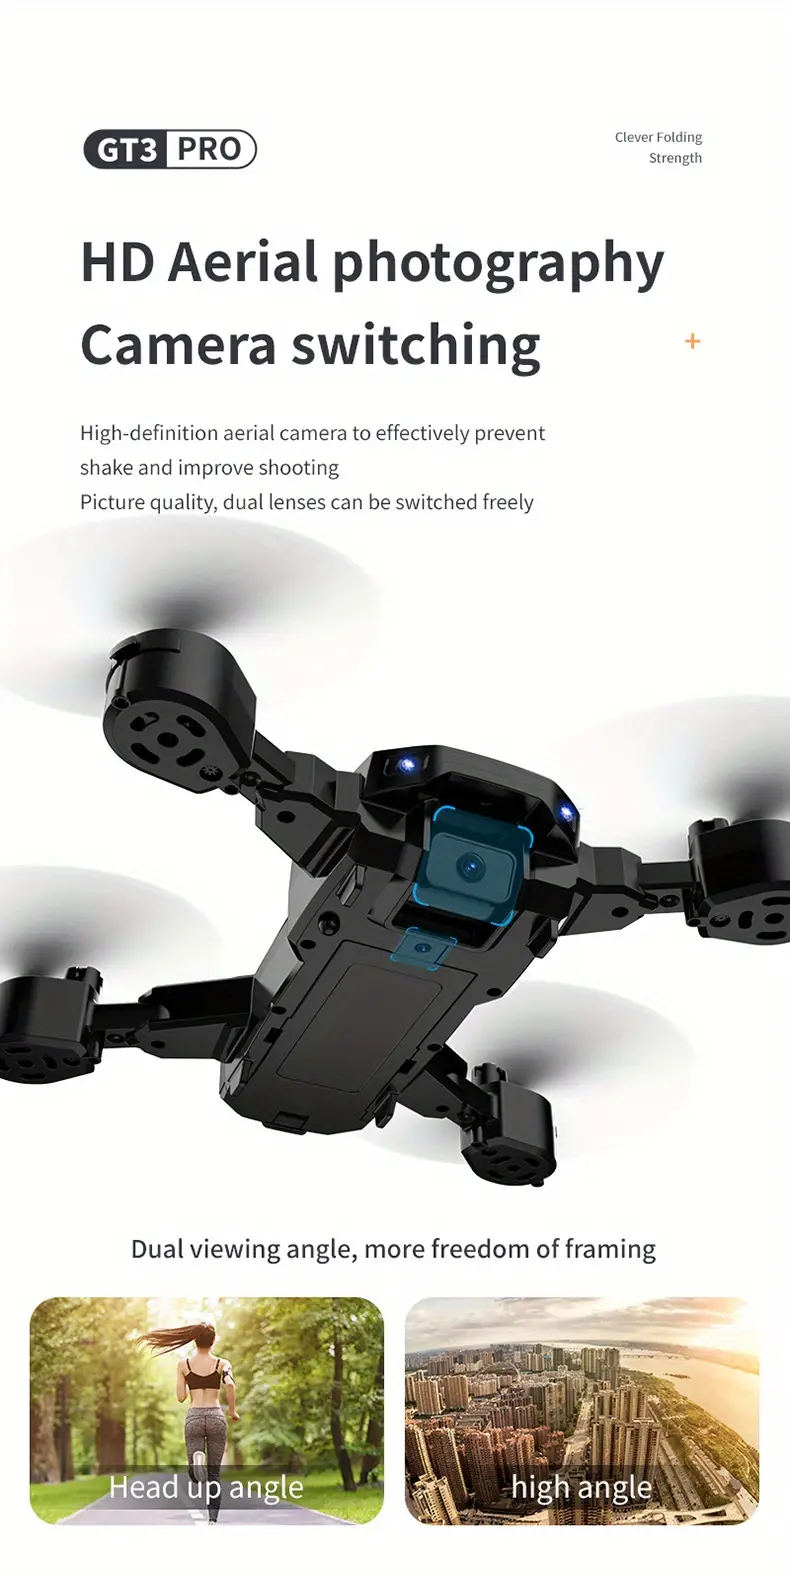 gt3 drone with dual camera 3 batteries optical flow location headless mode altitude hold mode foldable wifi fpv rc quadcopter helicopter toys gift for kids adults beginners details 3